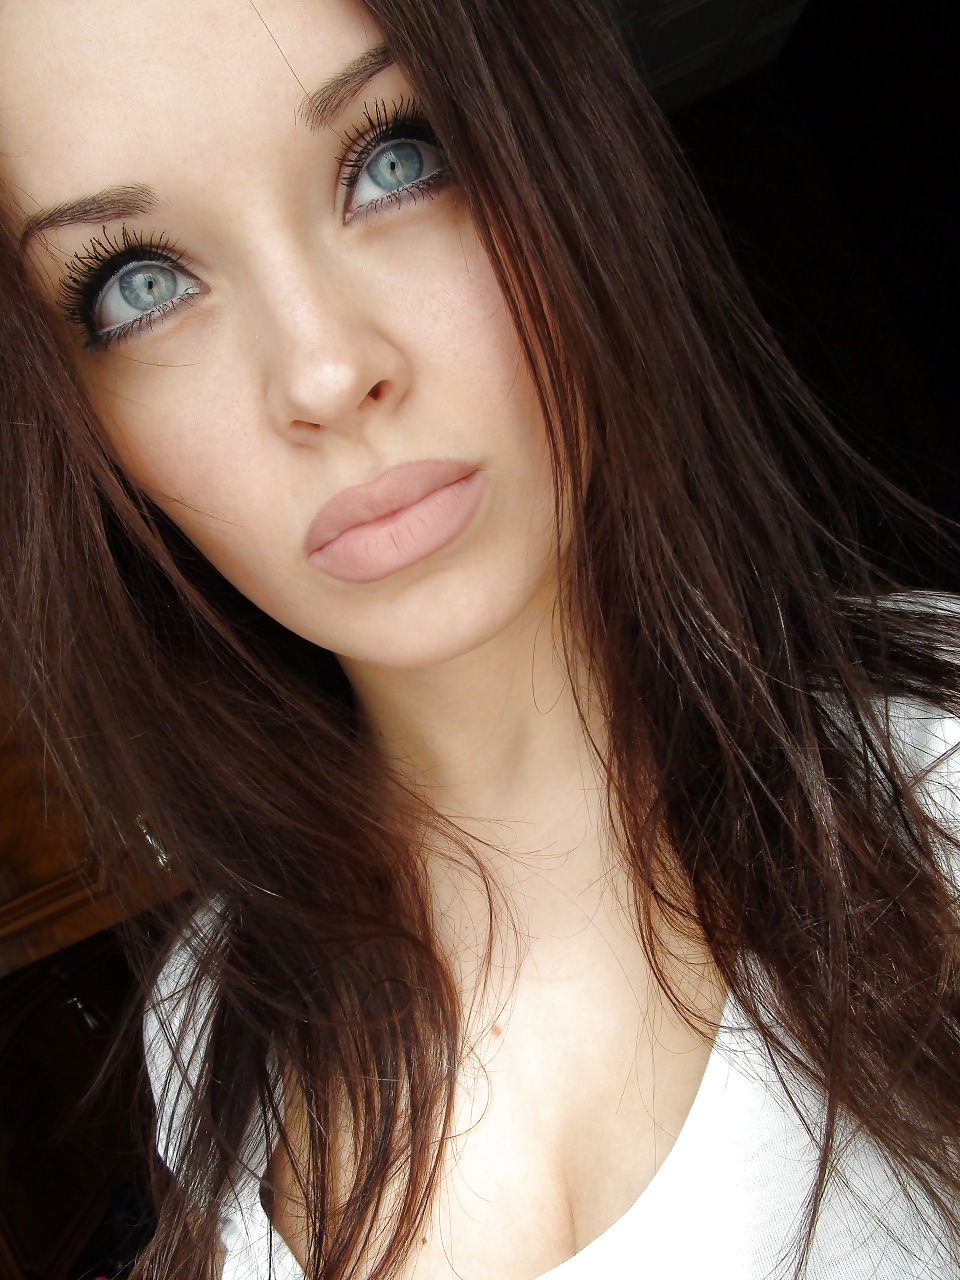 russian girls from social networks14 pict gal